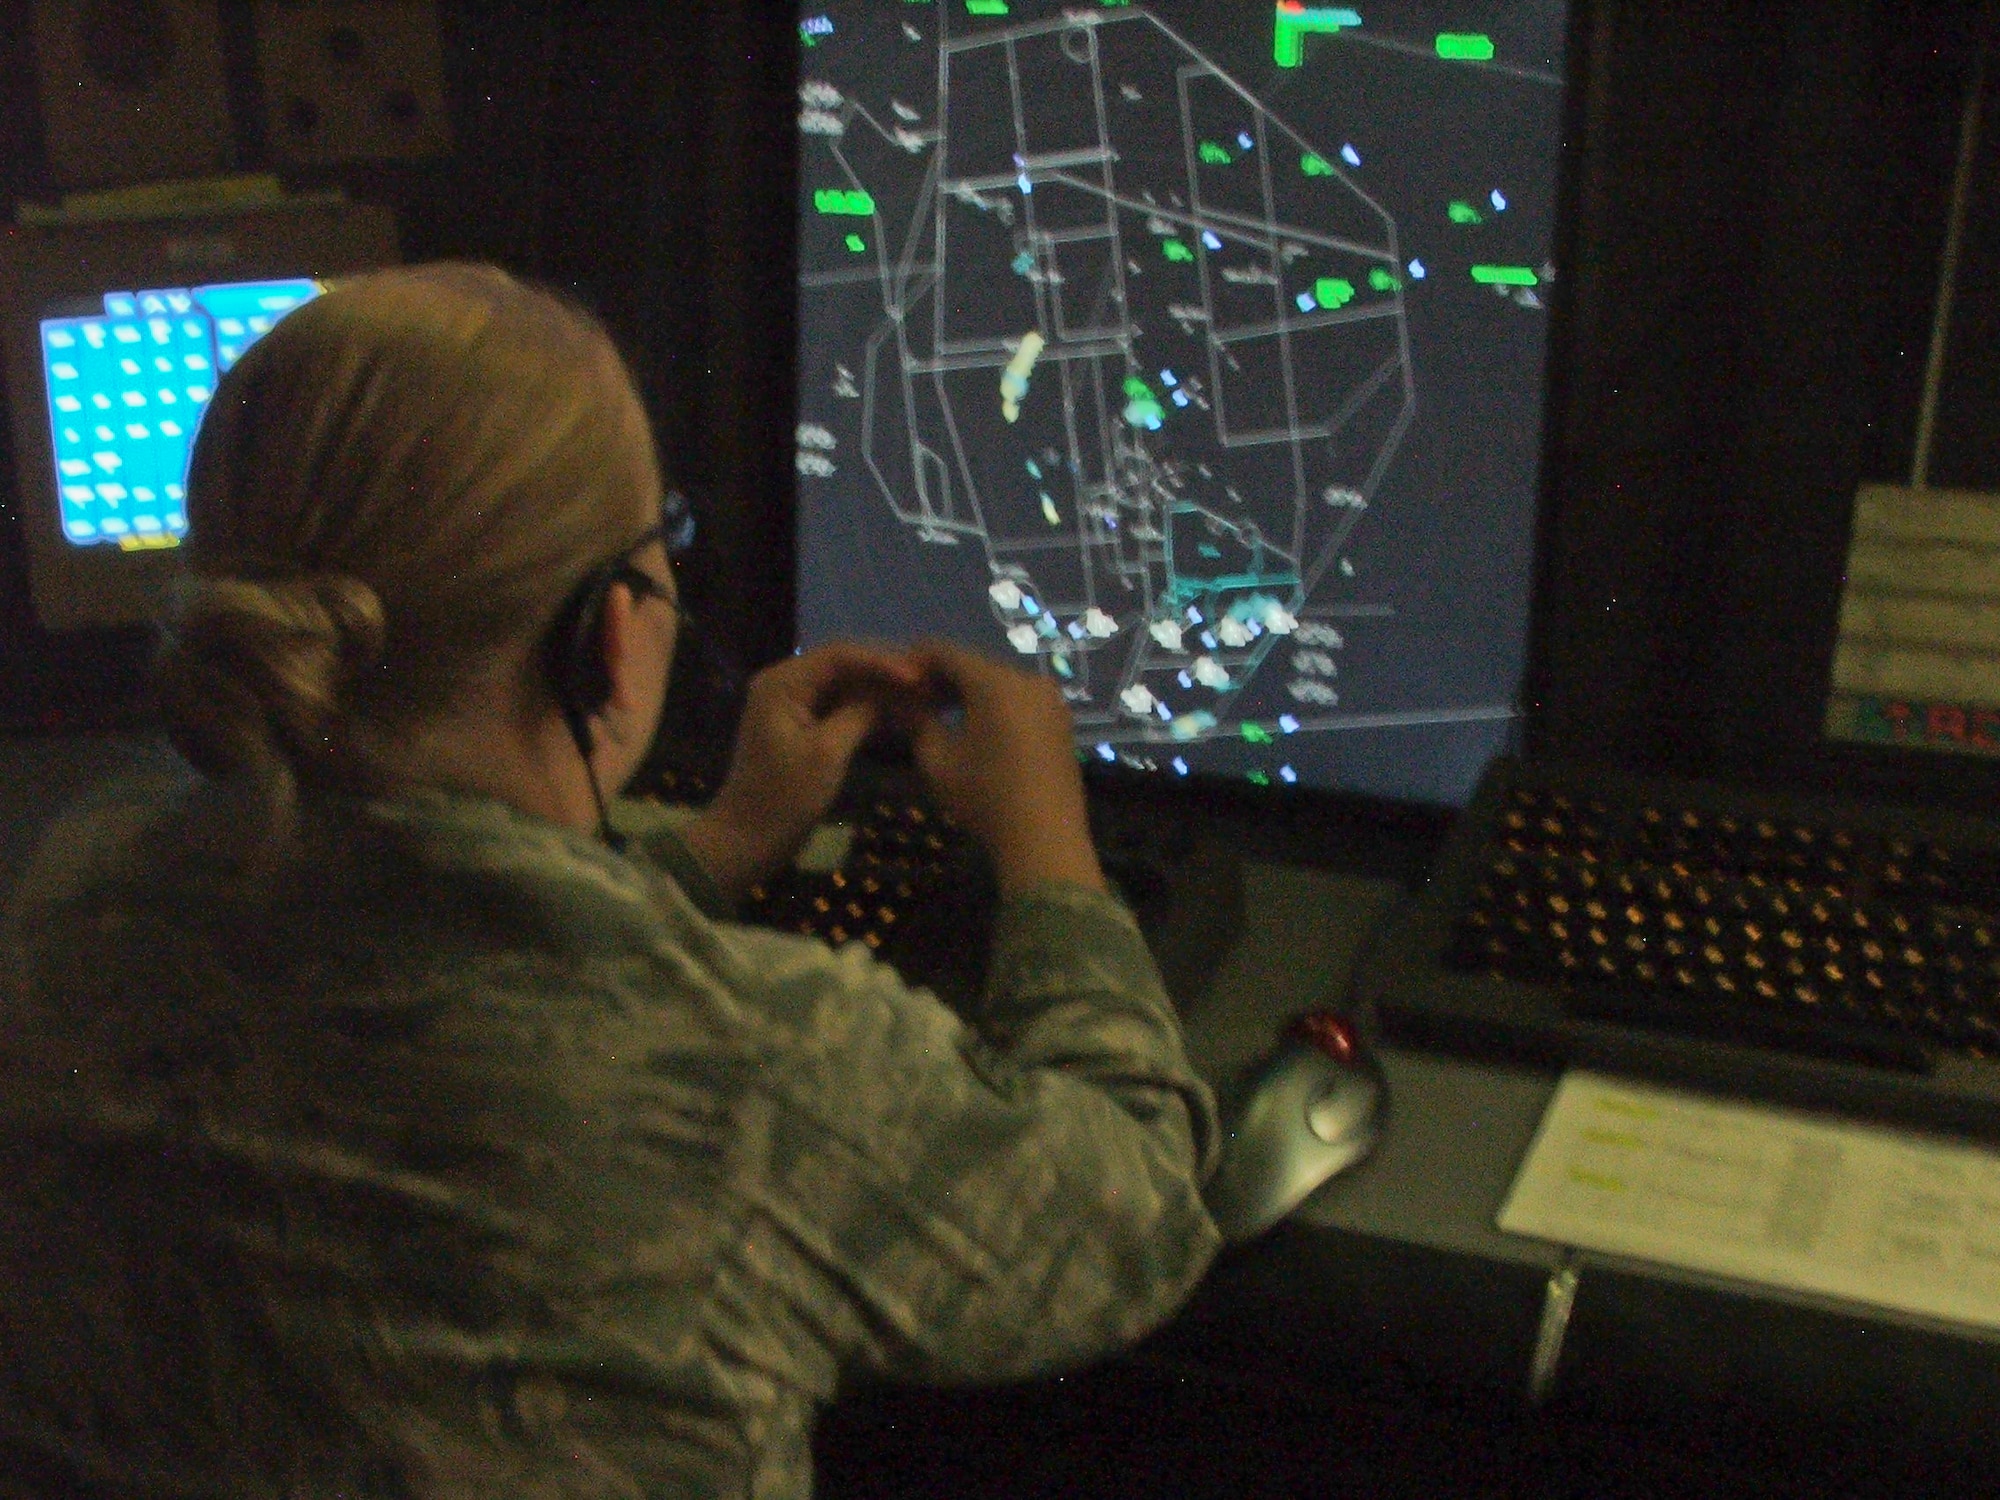 Senior Airman Caitlin Sullivan, 49th Operation Support Squadron air traffic controller, monitors the standard approach radar system at the J.W. Cox Range Control Center at White Sands Missile Range, N.M., Sept. 30. A standard approach radar system is a live feed which shows the correlation between aircraft and the airfield. Airmen from Holloman Air Force Base are stationed at WSMR to run the air traffic operations. (U.S. Air Force photo by Airman 1st Class Aaron Montoya/Released)